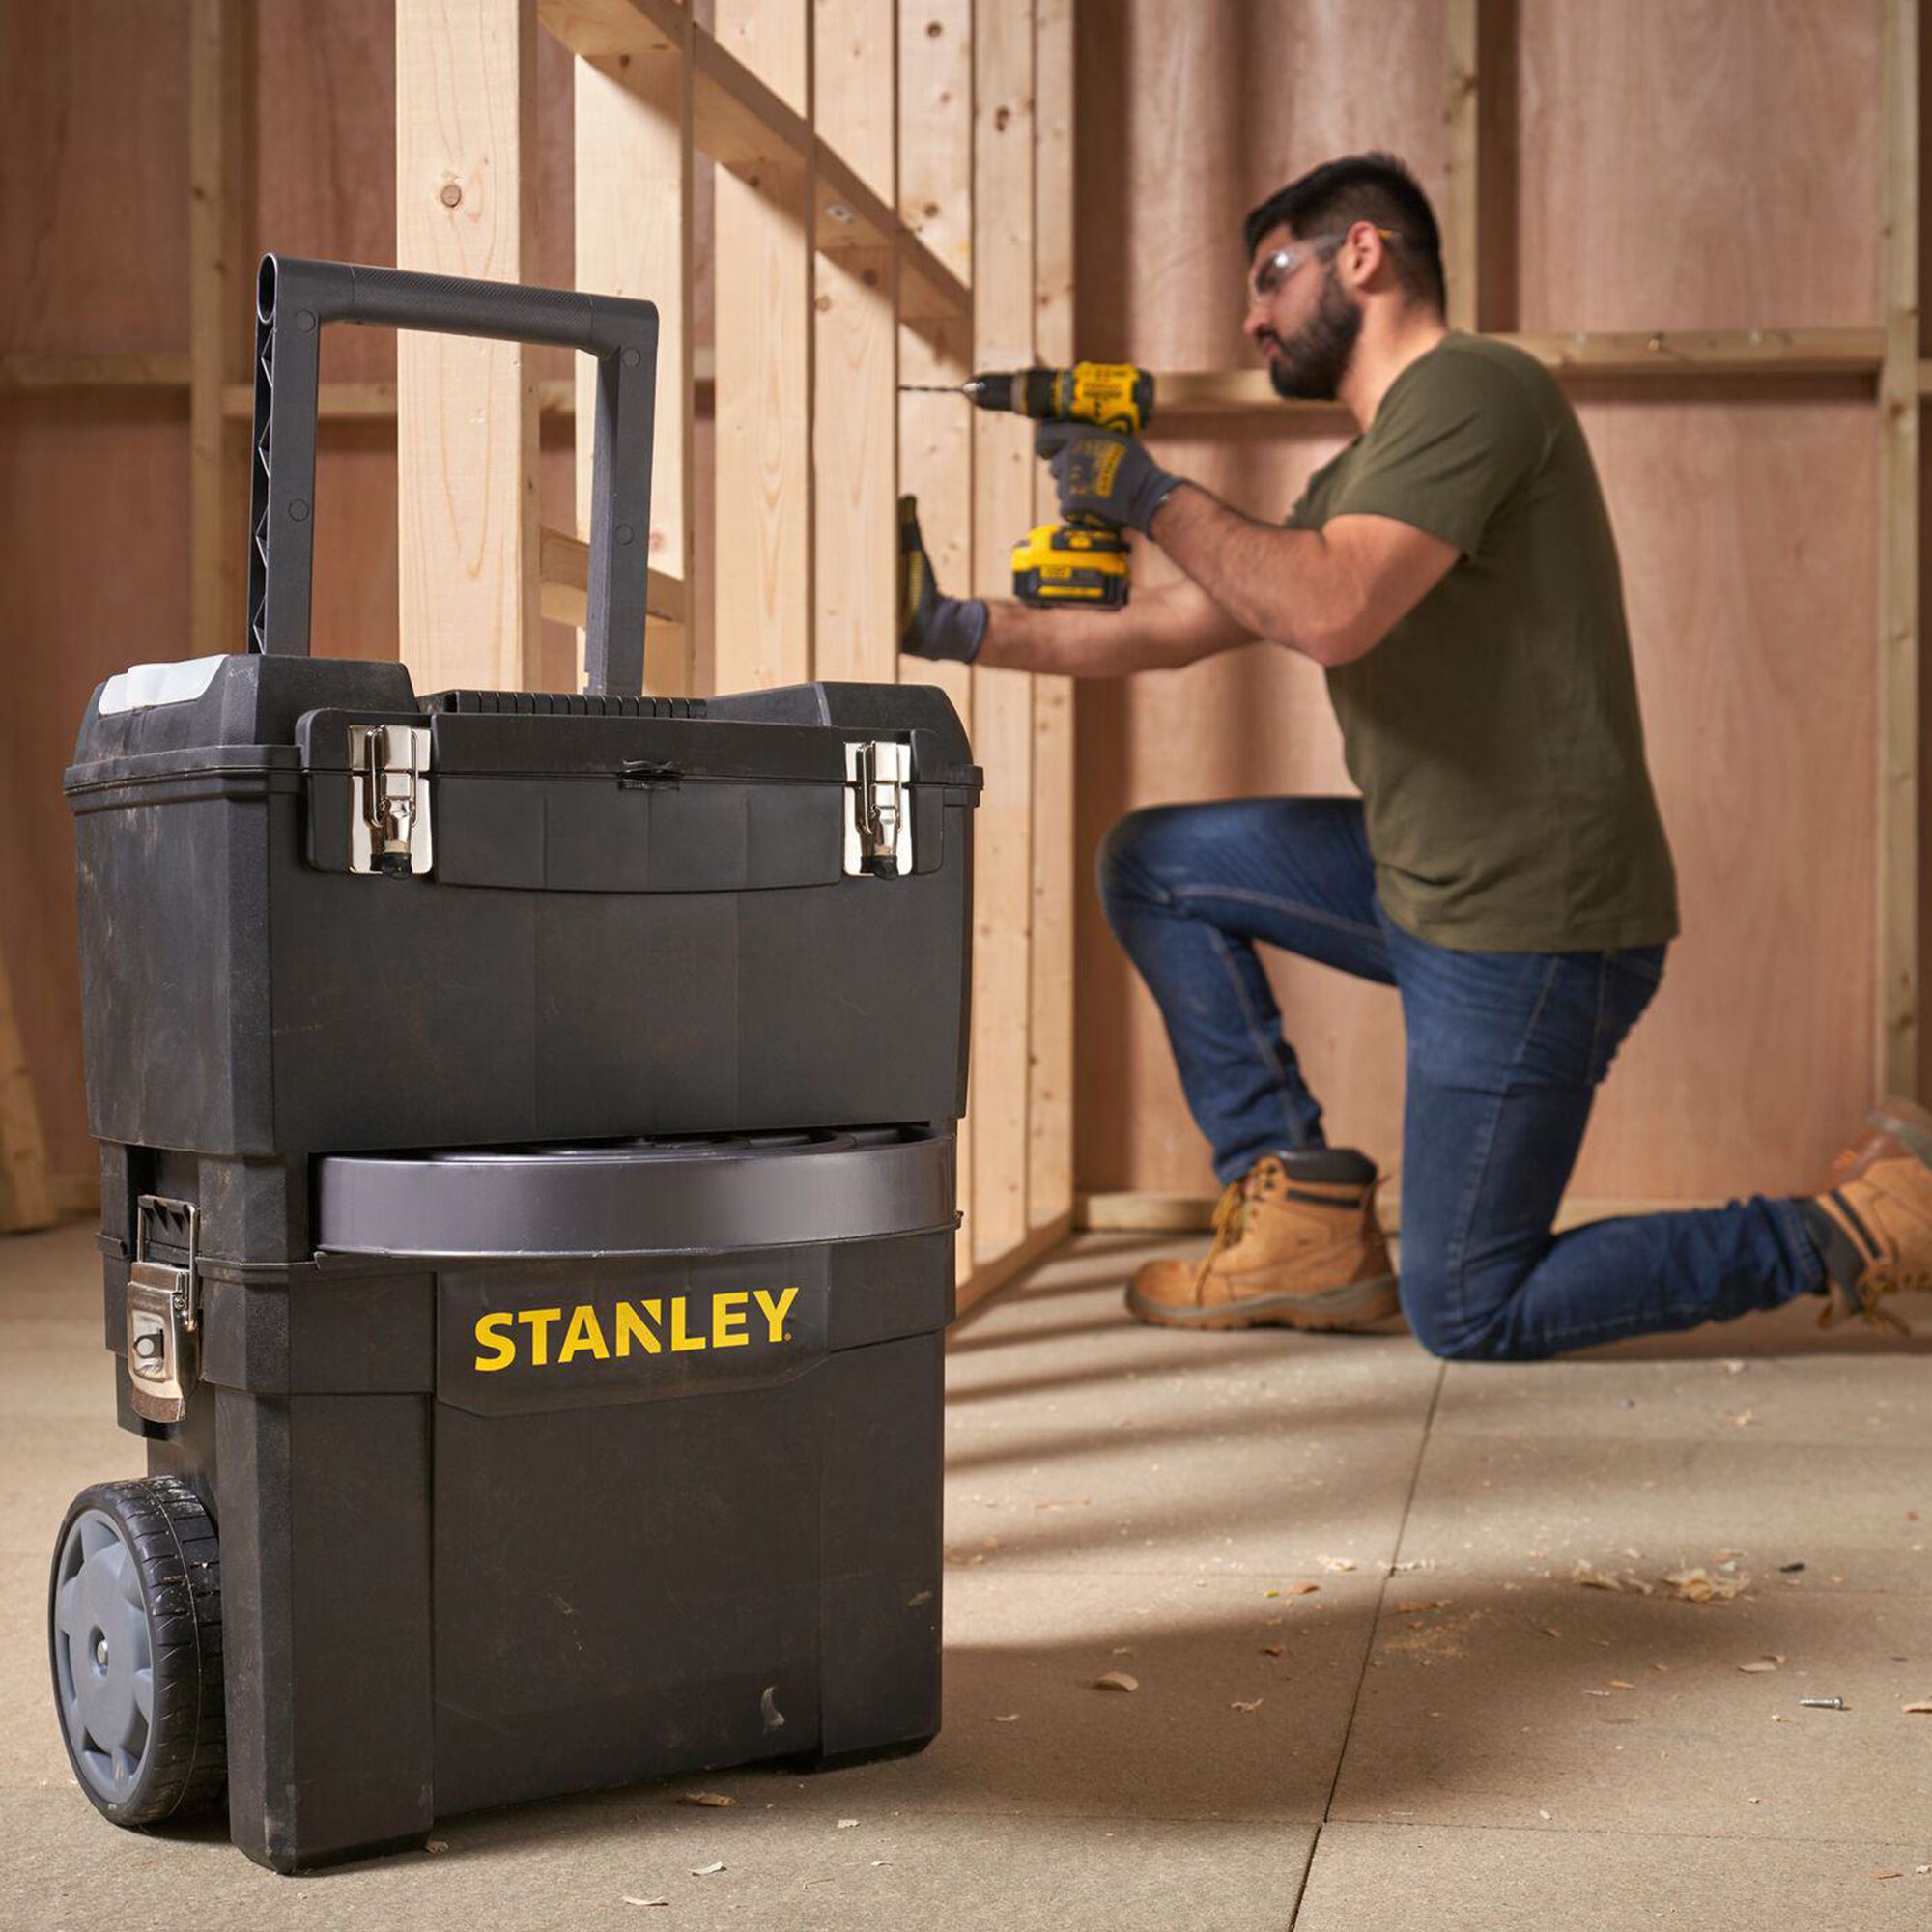 Stanley Polypropylene 4 compartment Trolley & toolbox (H)638mm (W)296mm (D)470mm